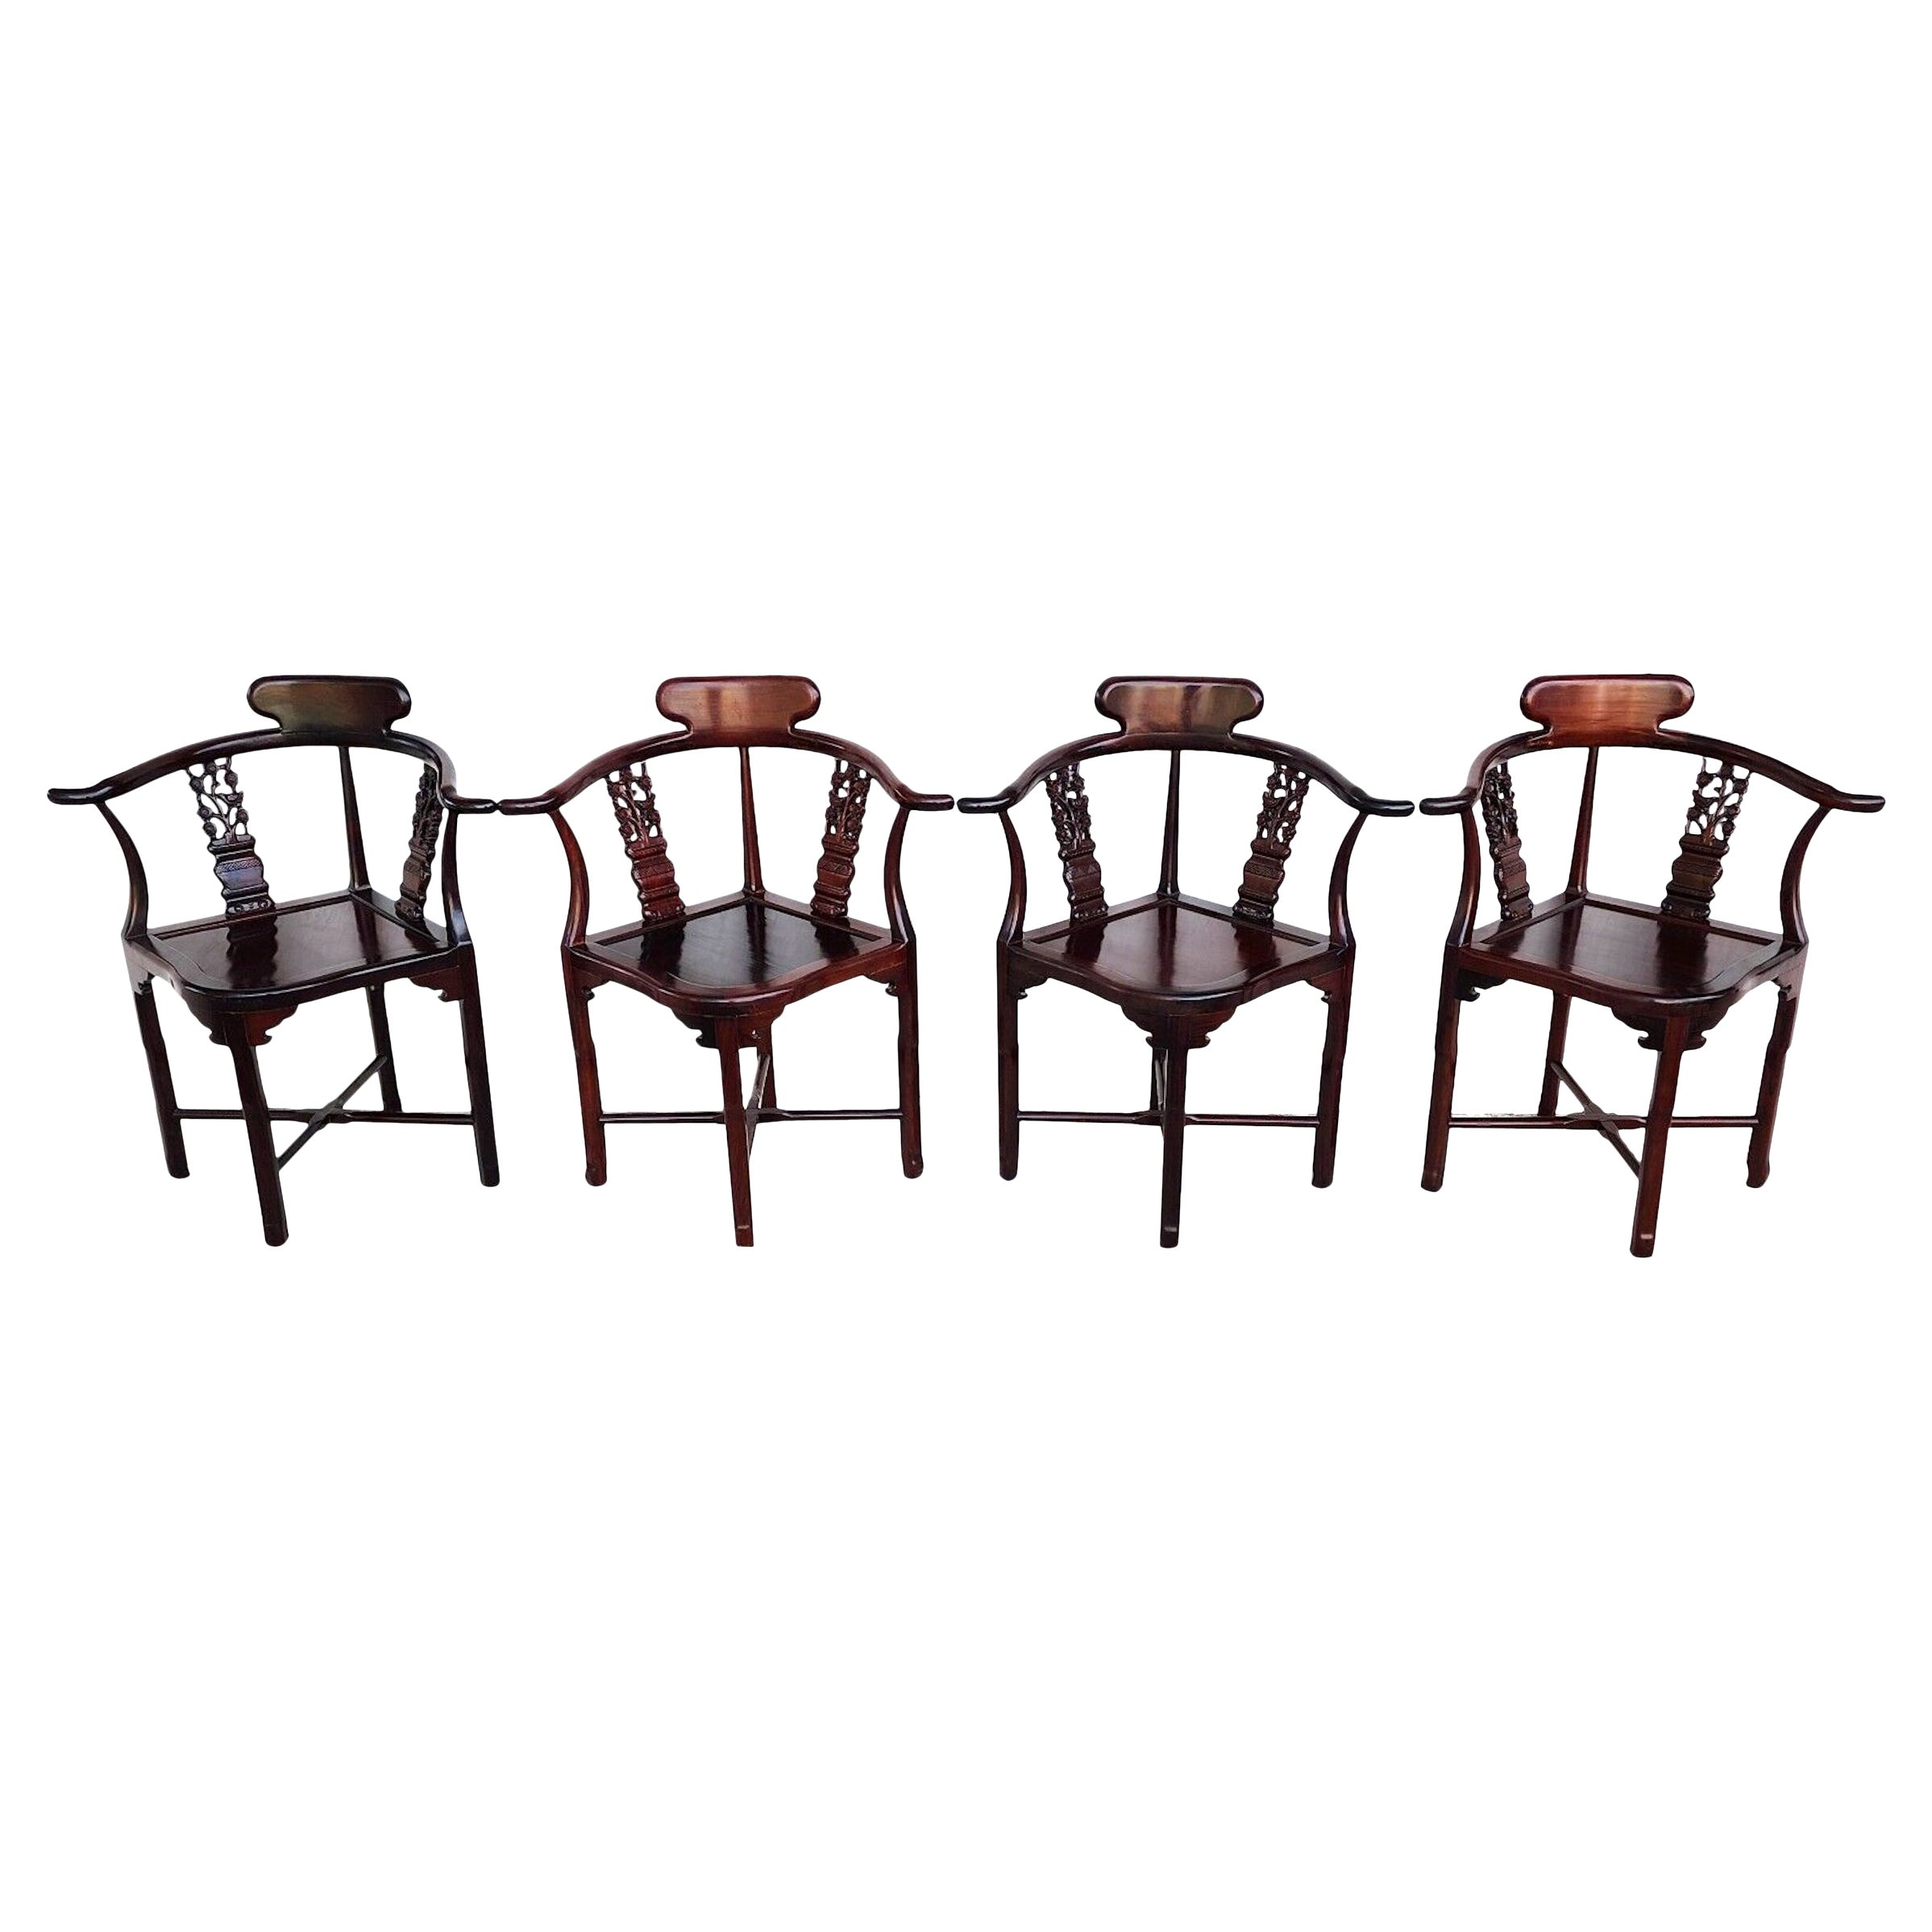 Chinese Rosewood Corner Dining Chairs Vintage - Set of 4 For Sale